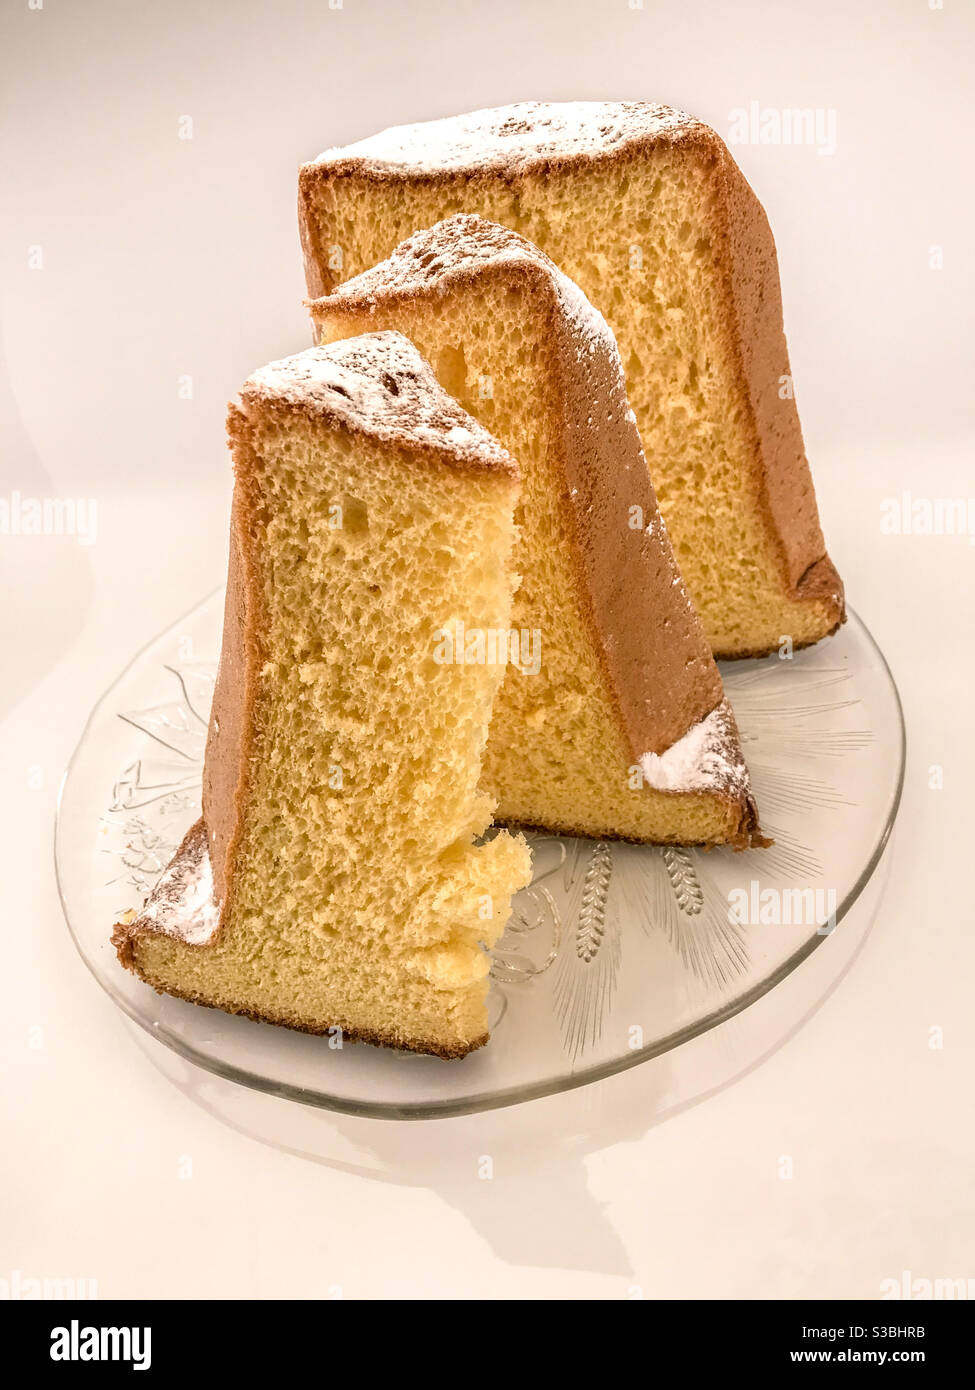 https://c8.alamy.com/comp/S3BHRB/pandoro-typical-italian-christmas-cakeslices-with-icing-sugar-on-plate-S3BHRB.jpg